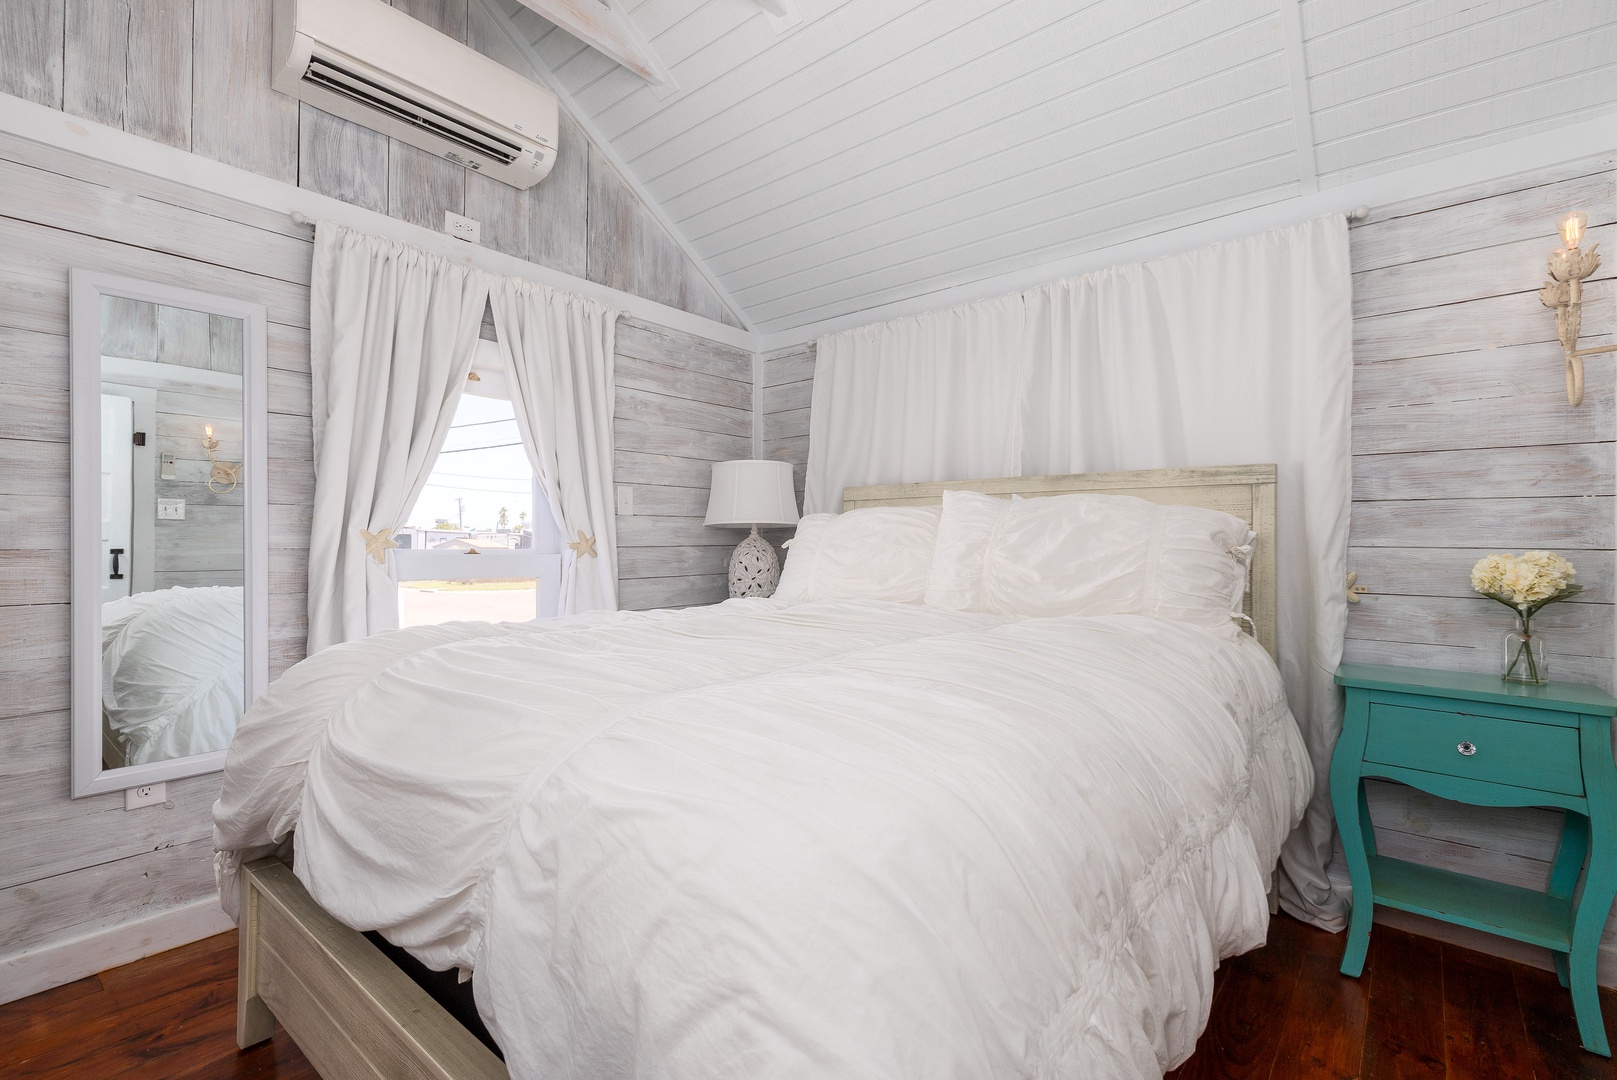 The cozy bedroom offers a plush queen bed and private en suite bathroom